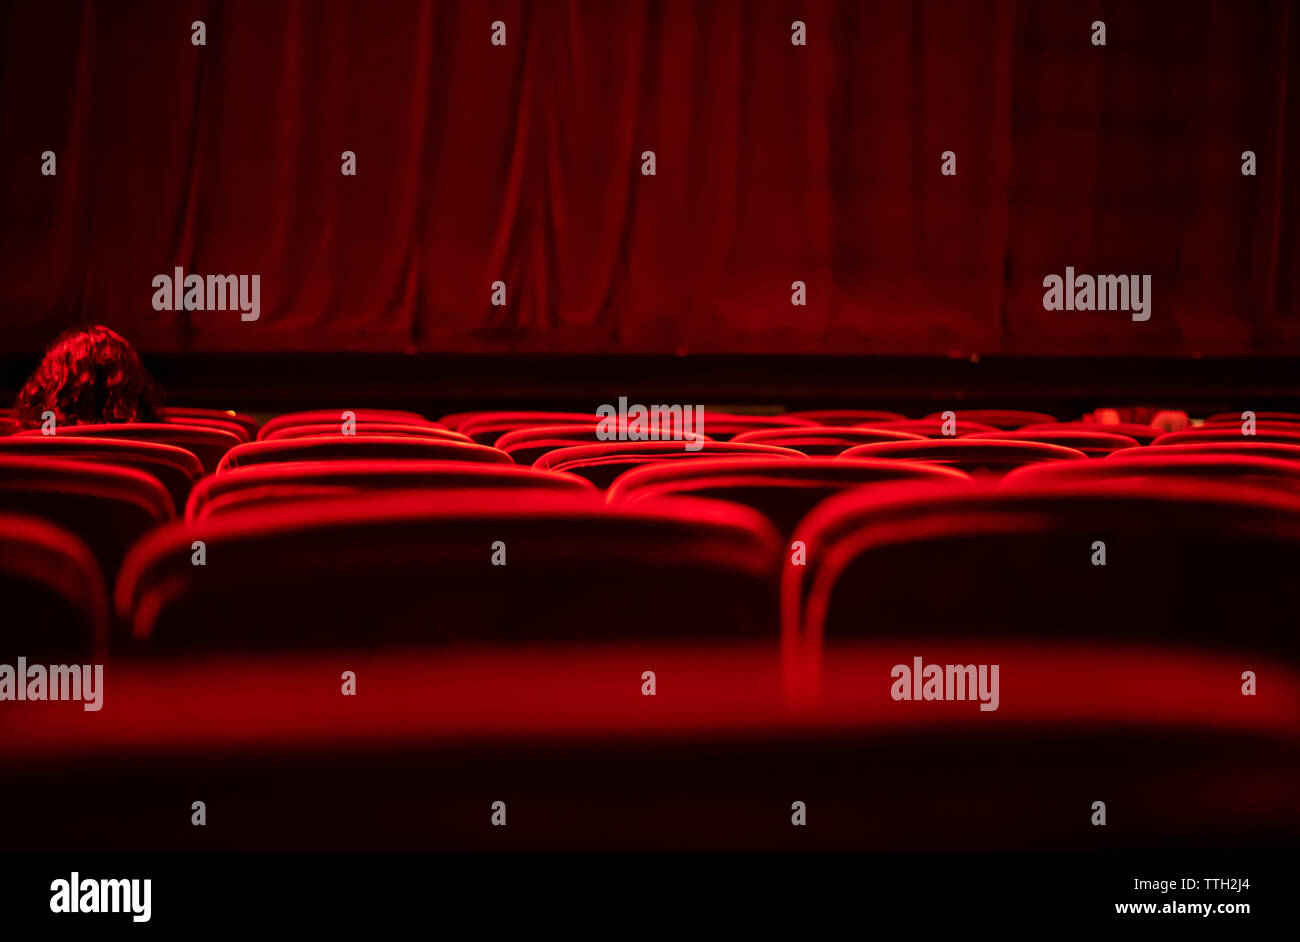 A woman with red hair sitting on a velvet red seat at an empty theater Stock Photo